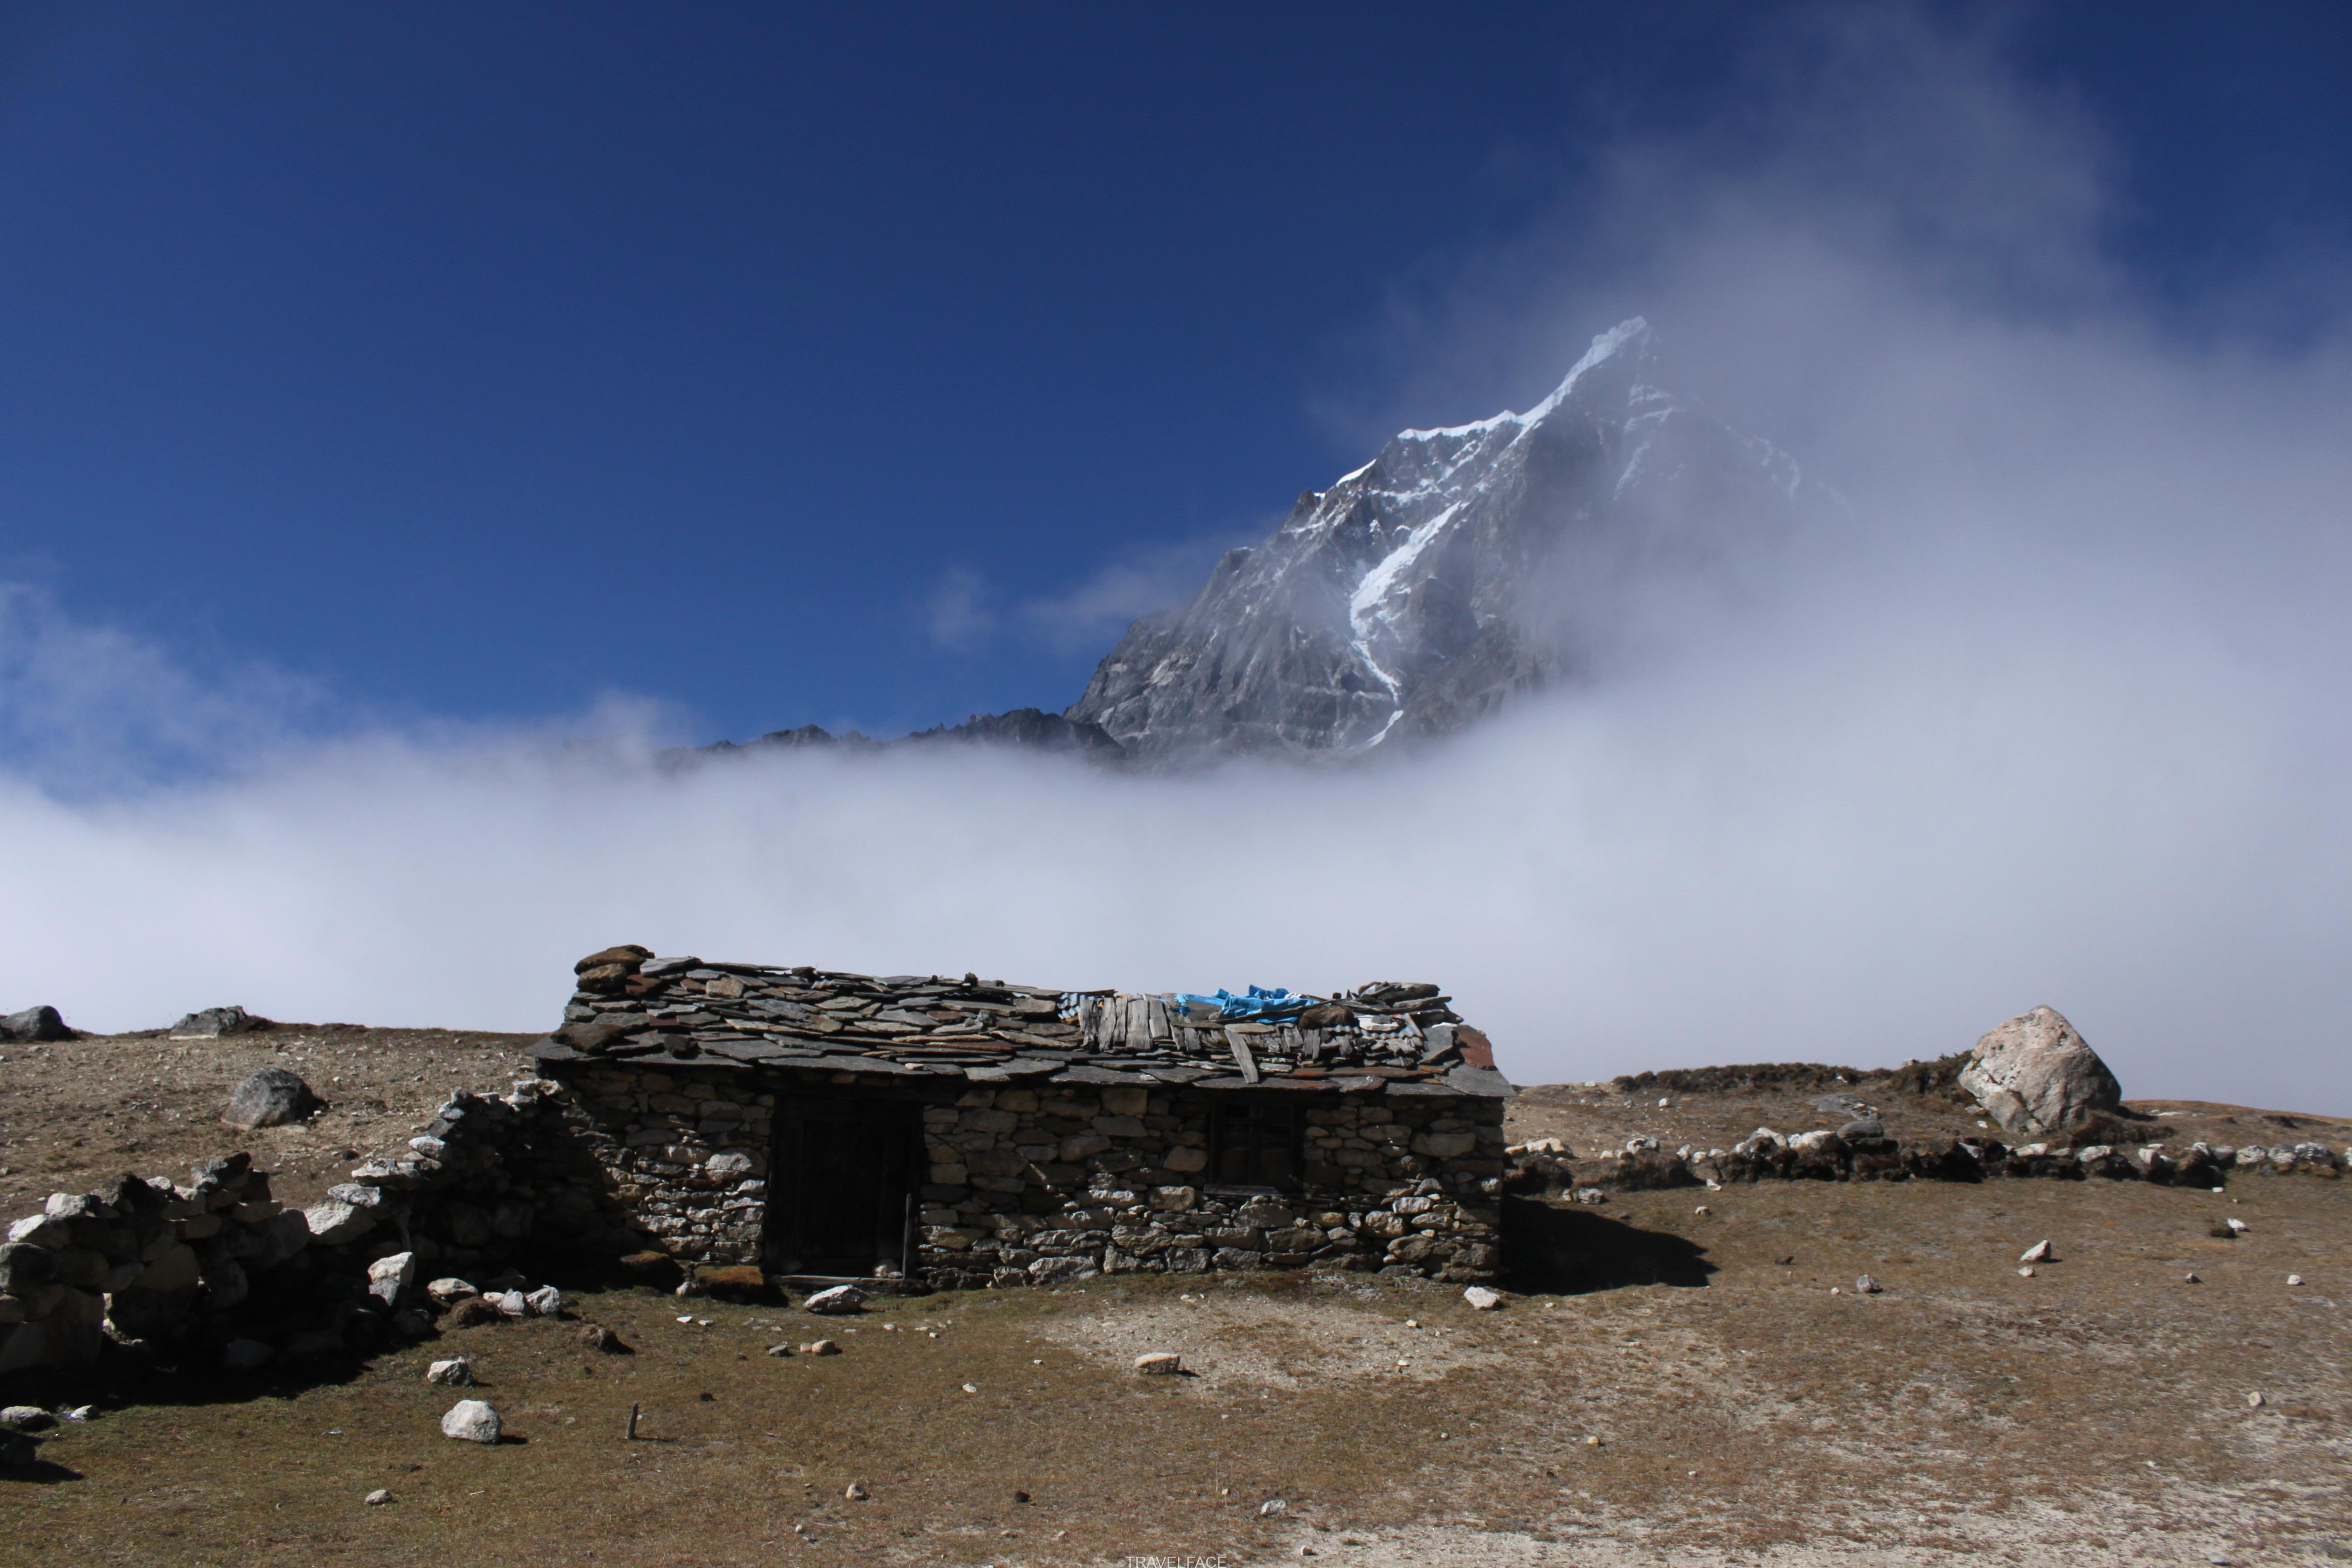 An old town house during the EBC trek